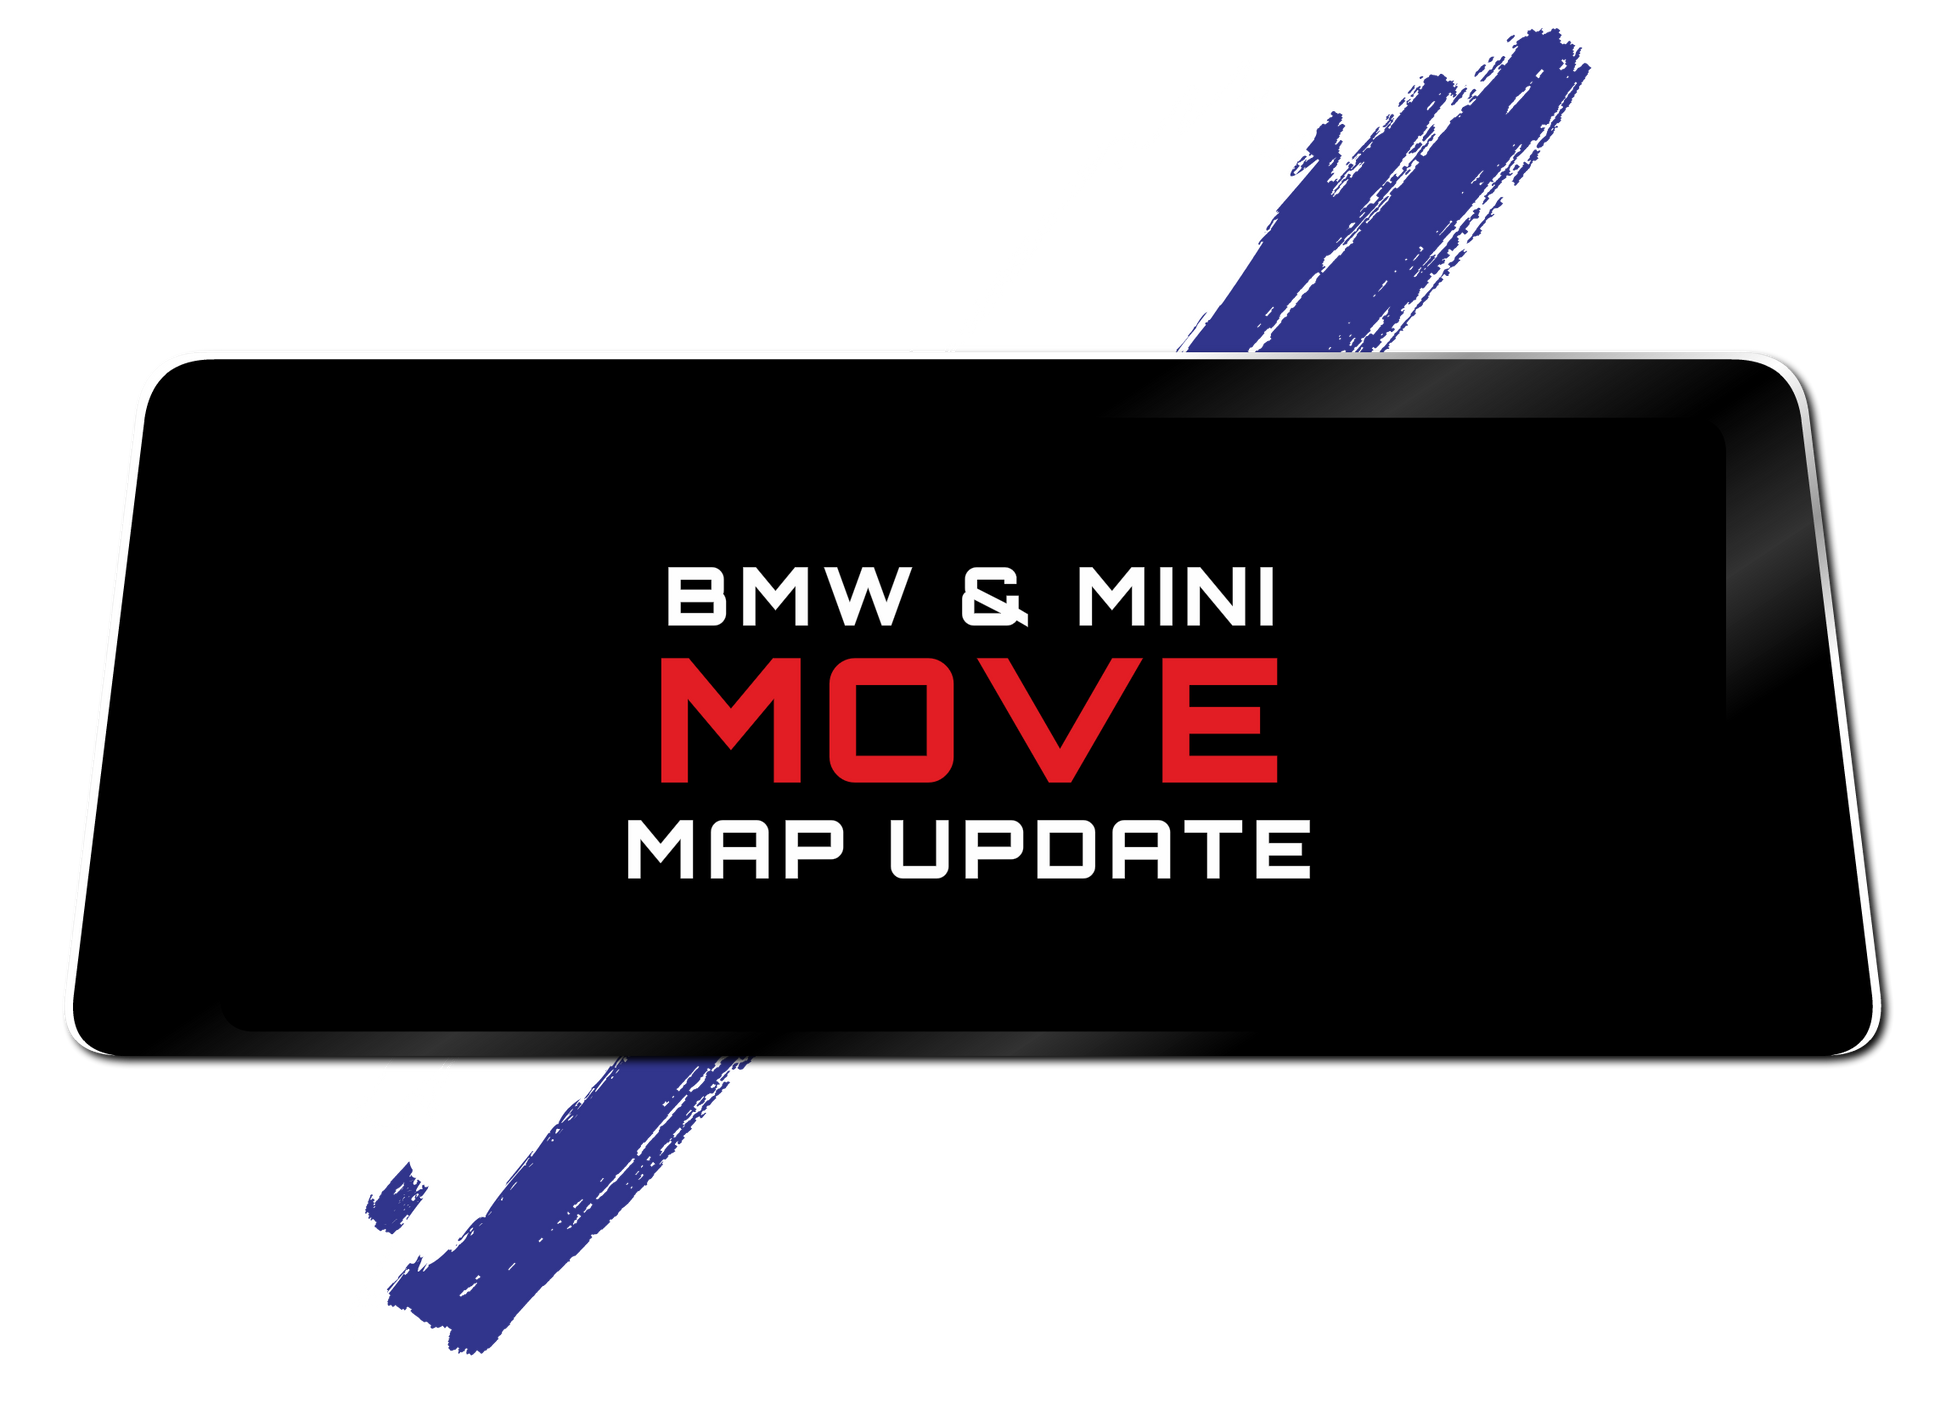 bmw and mini Move map update